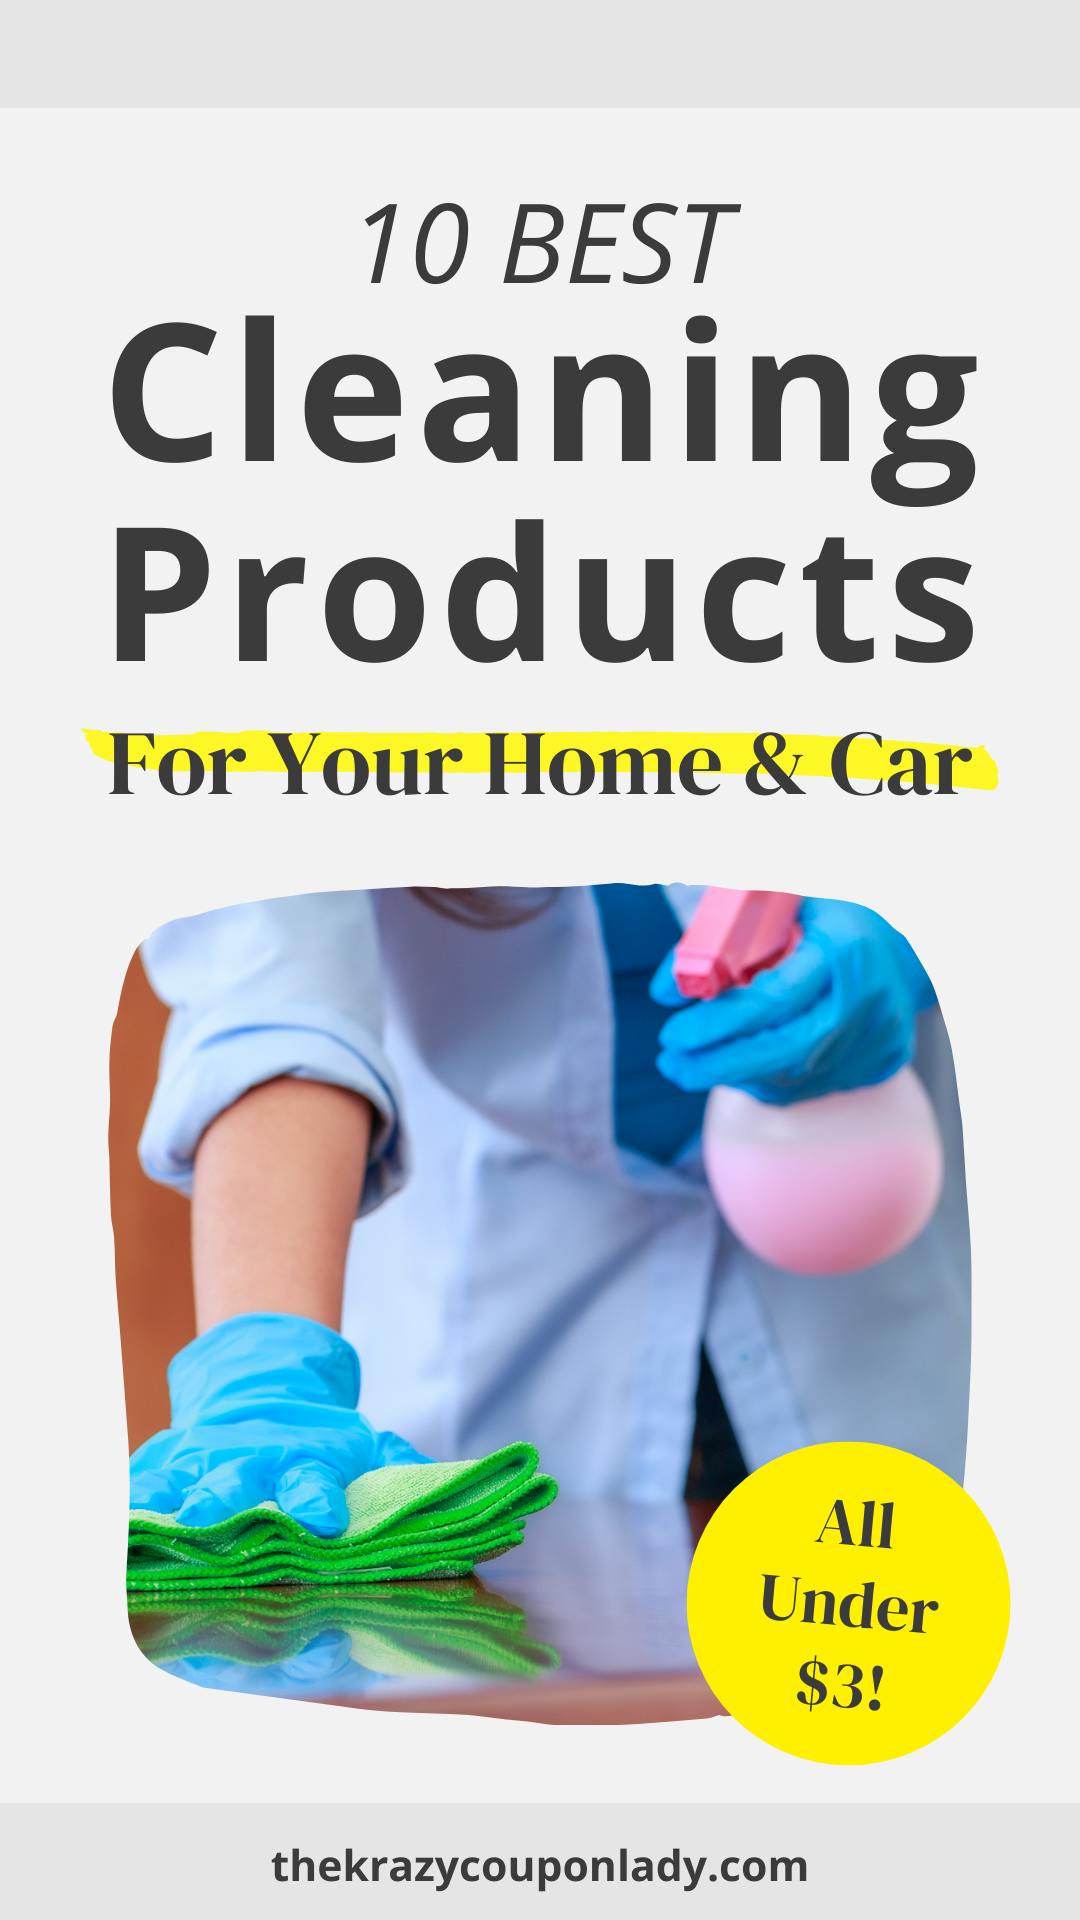 10 Best Cleaning Products for Your Home & Car, All Under $7